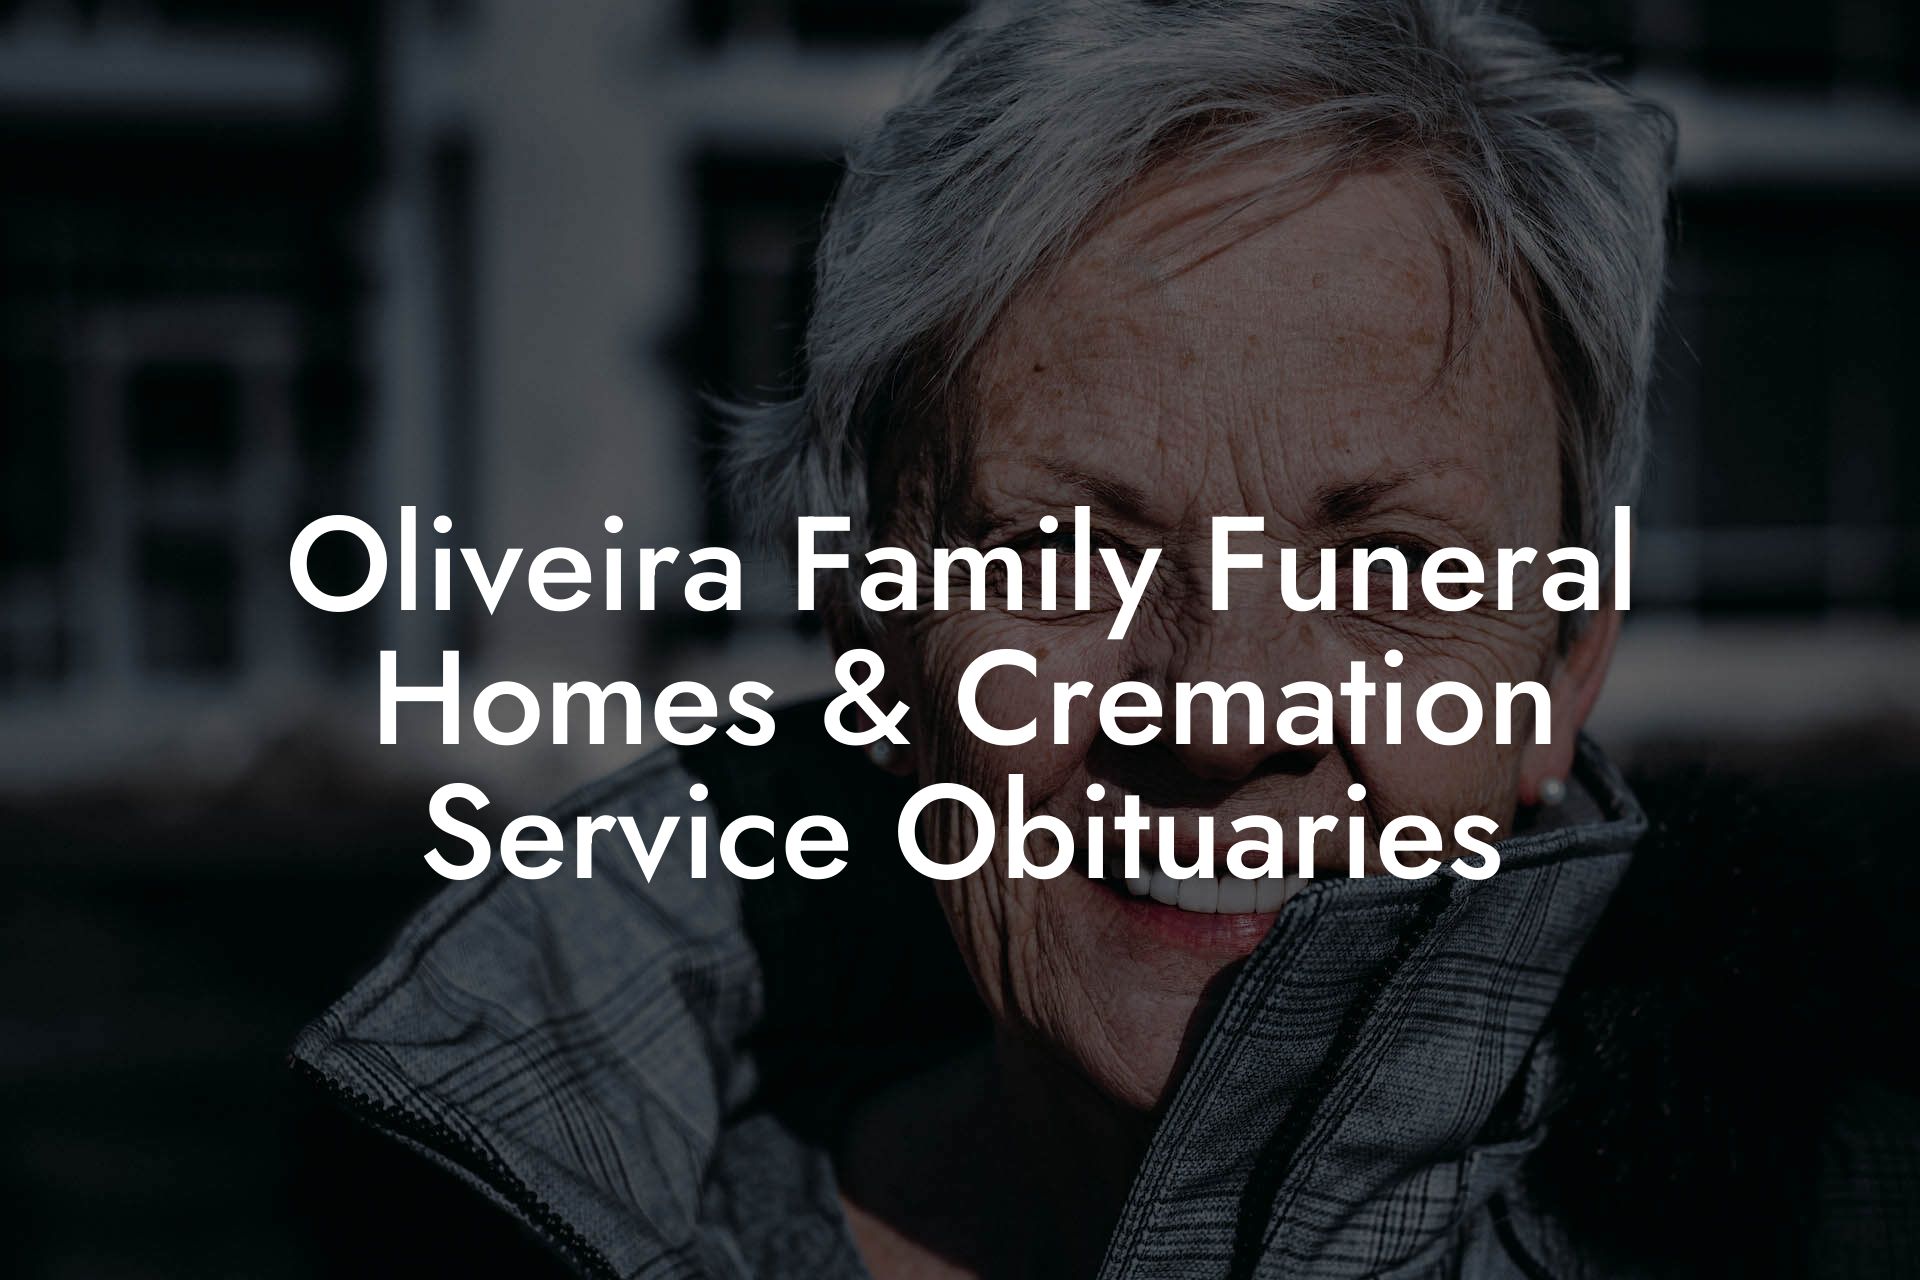 Oliveira Family Funeral Homes & Cremation Service Obituaries